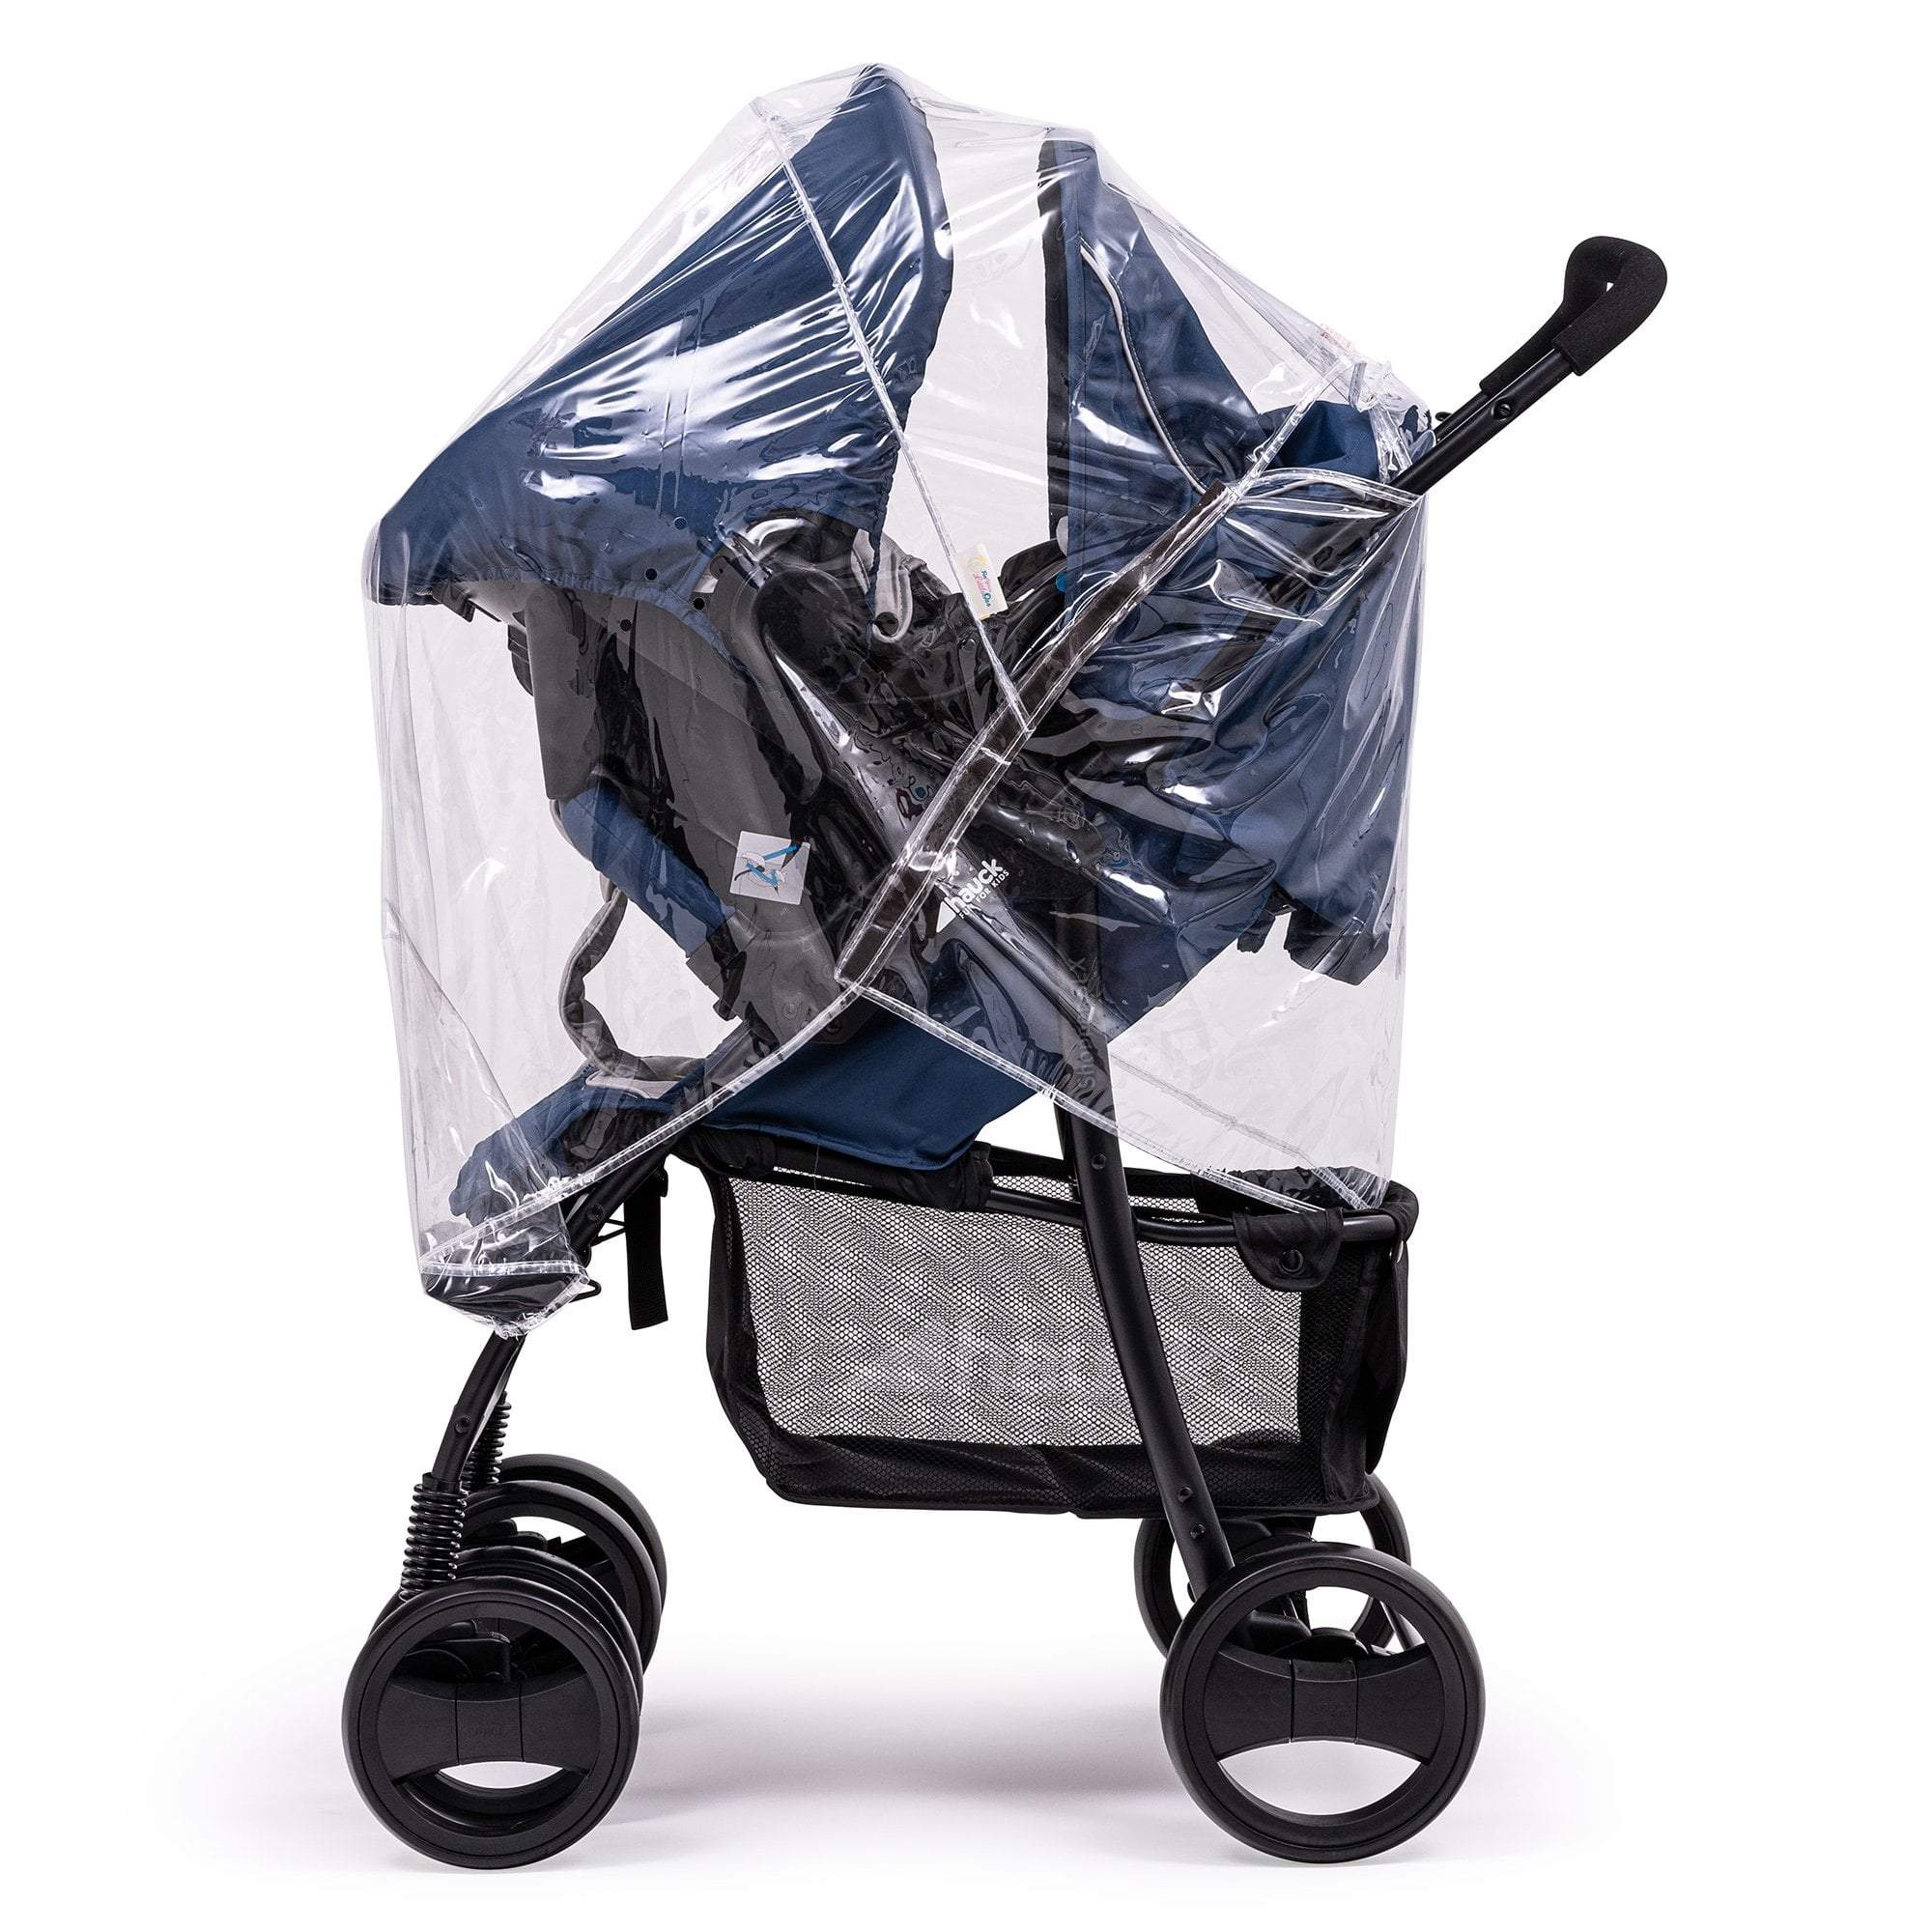 Travel System Raincover Compatible with Esprit - Fits All Models - For Your Little One